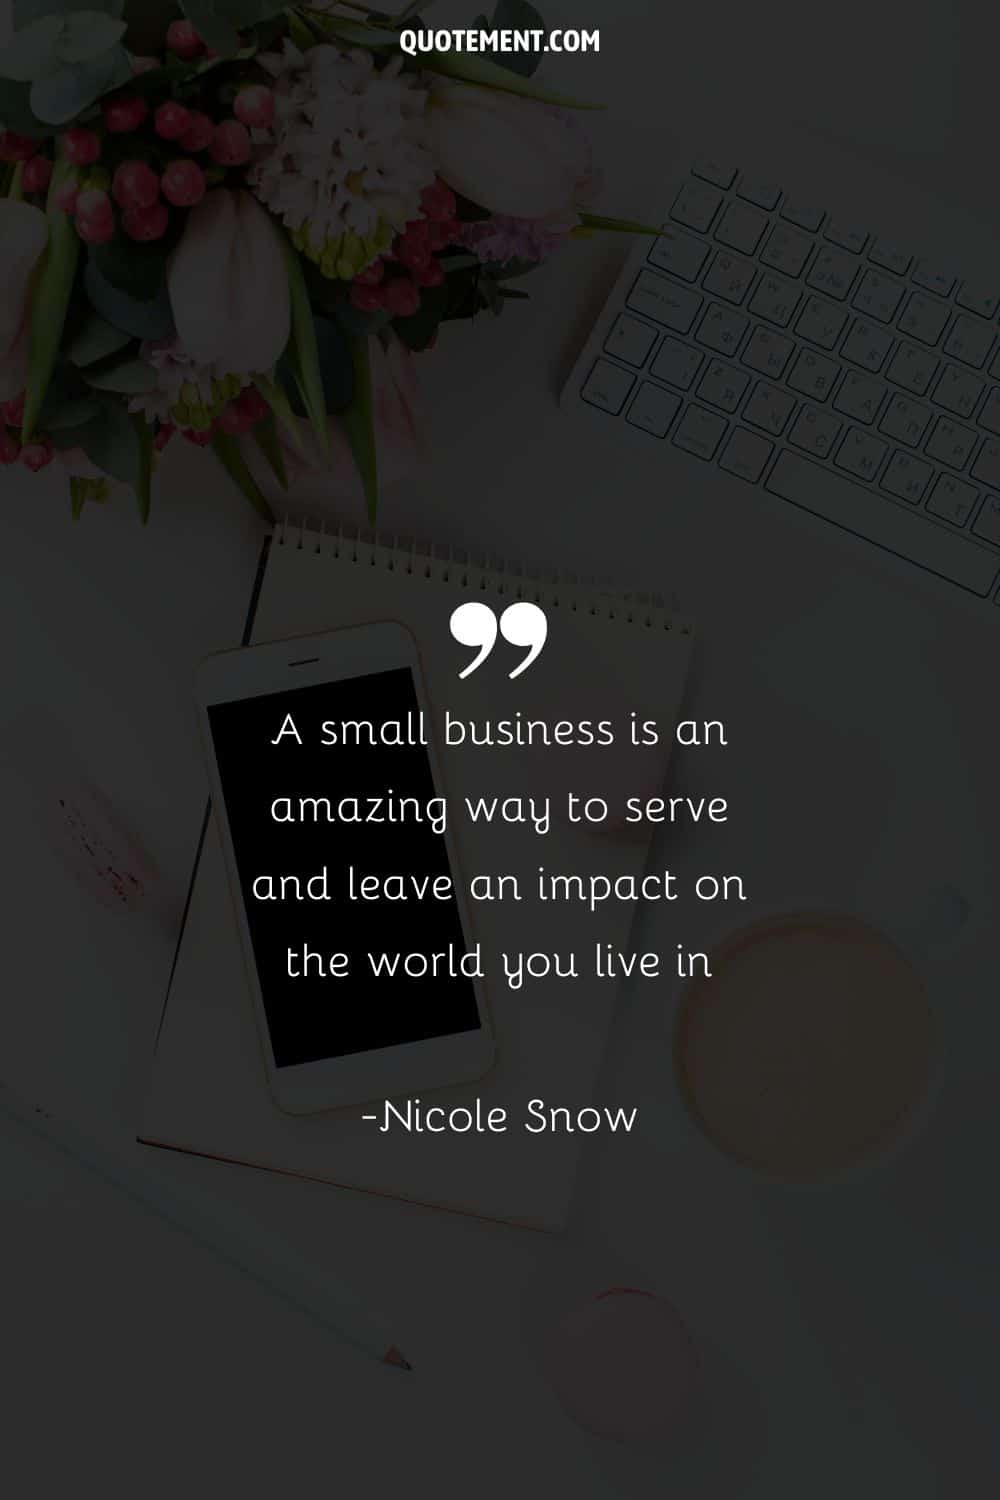 A small business is an amazing way to serve and leave an impact on the world you live in